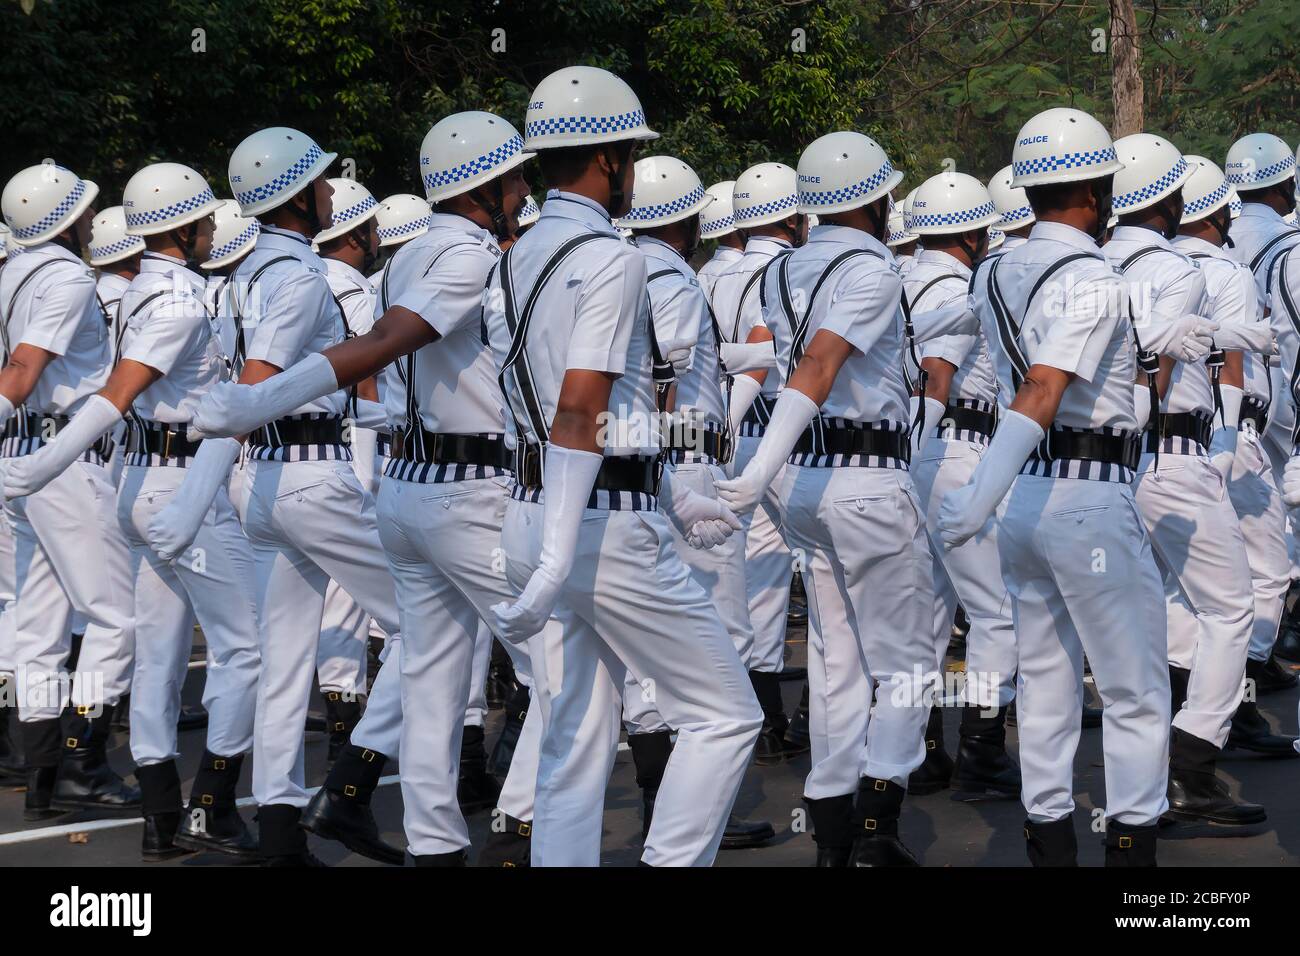 Kolkata, West Bengal, India - 26th January 2020 : Marh past of white dressed Kolkata Police Officers in white dress in morning, India's republic day. Stock Photo